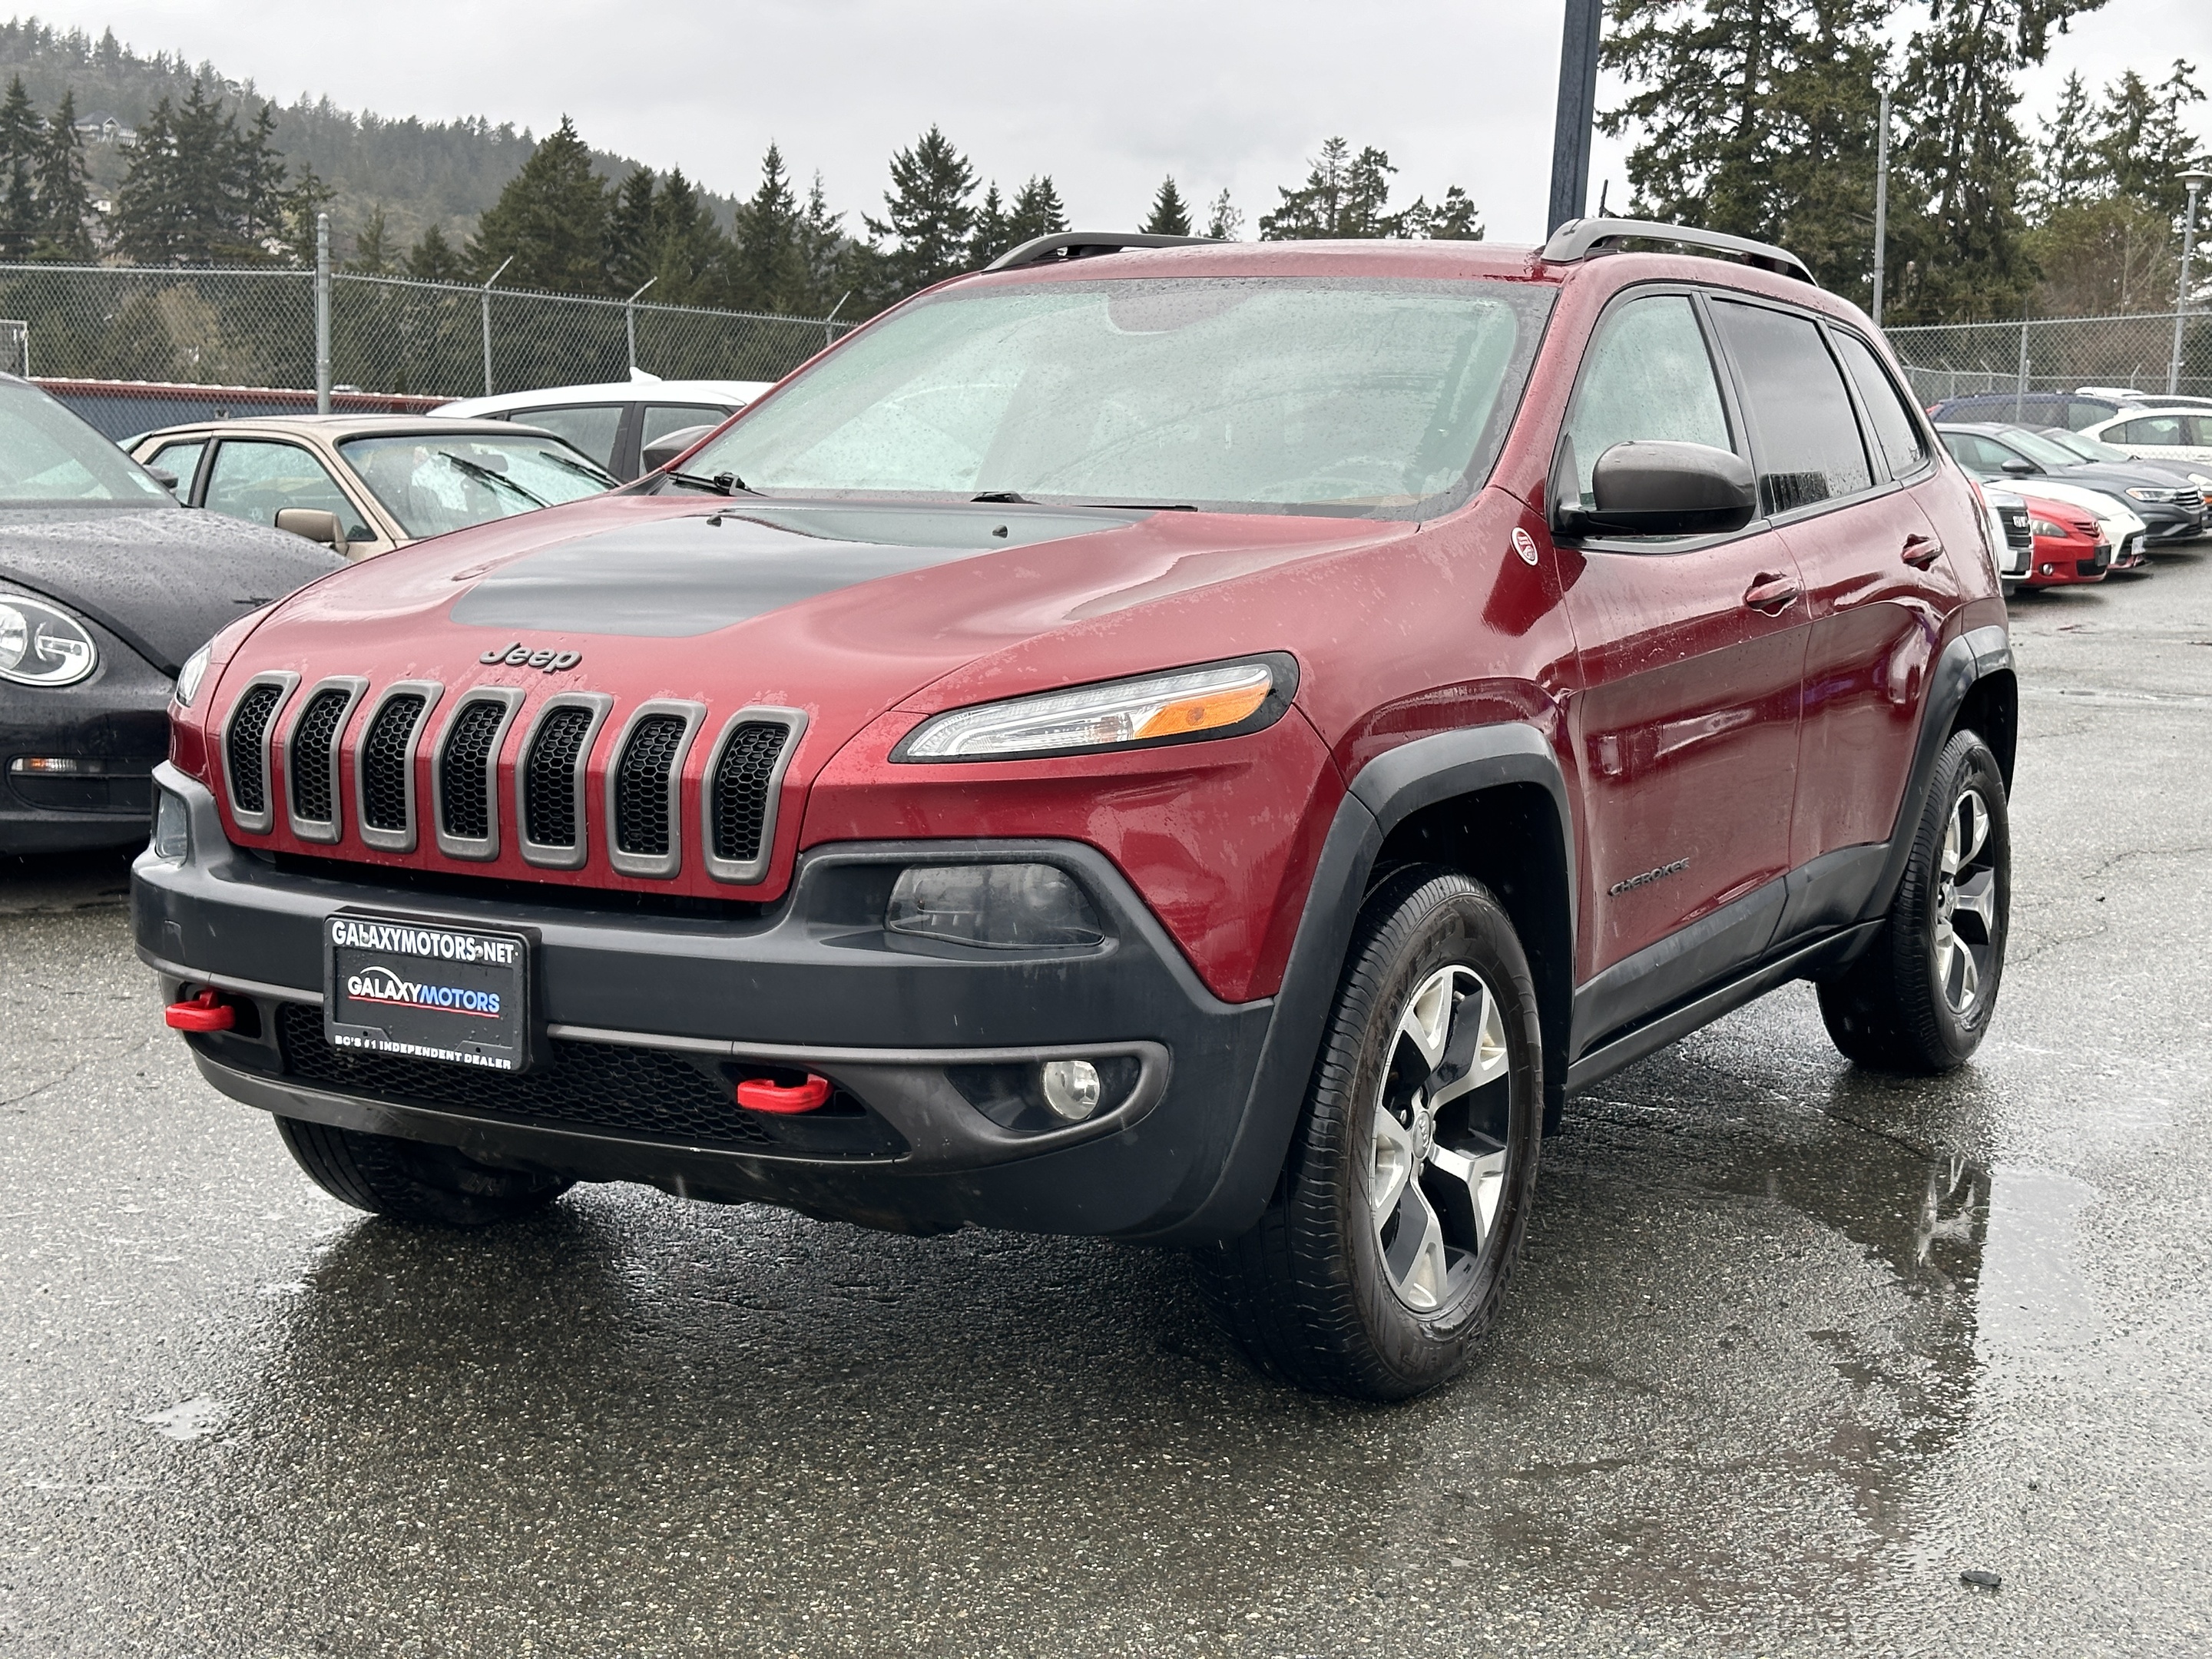 2016 Jeep Cherokee Trailhawk 4WD-Auto,Leather,AC,Keyless Entry